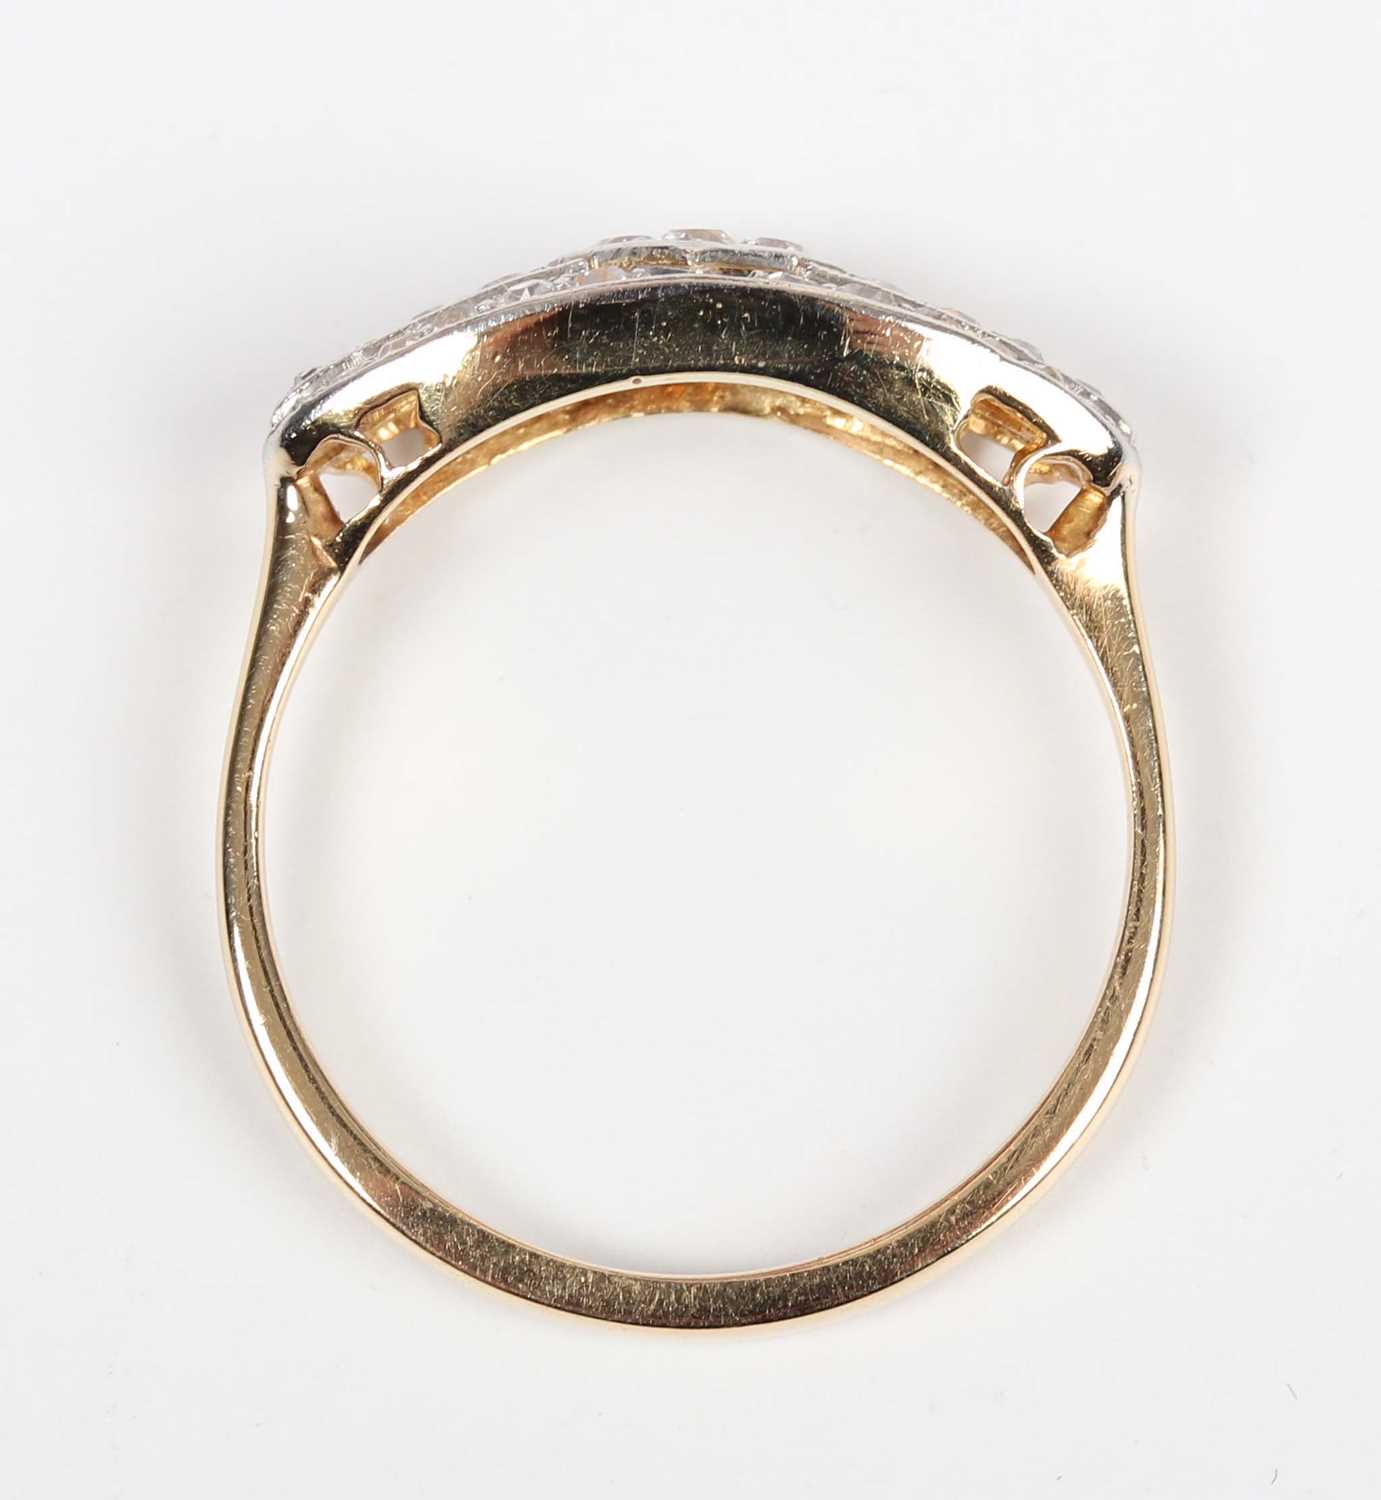 A gold and diamond ring in an oval panel shaped design, mounted with circular cut diamonds, - Image 4 of 5